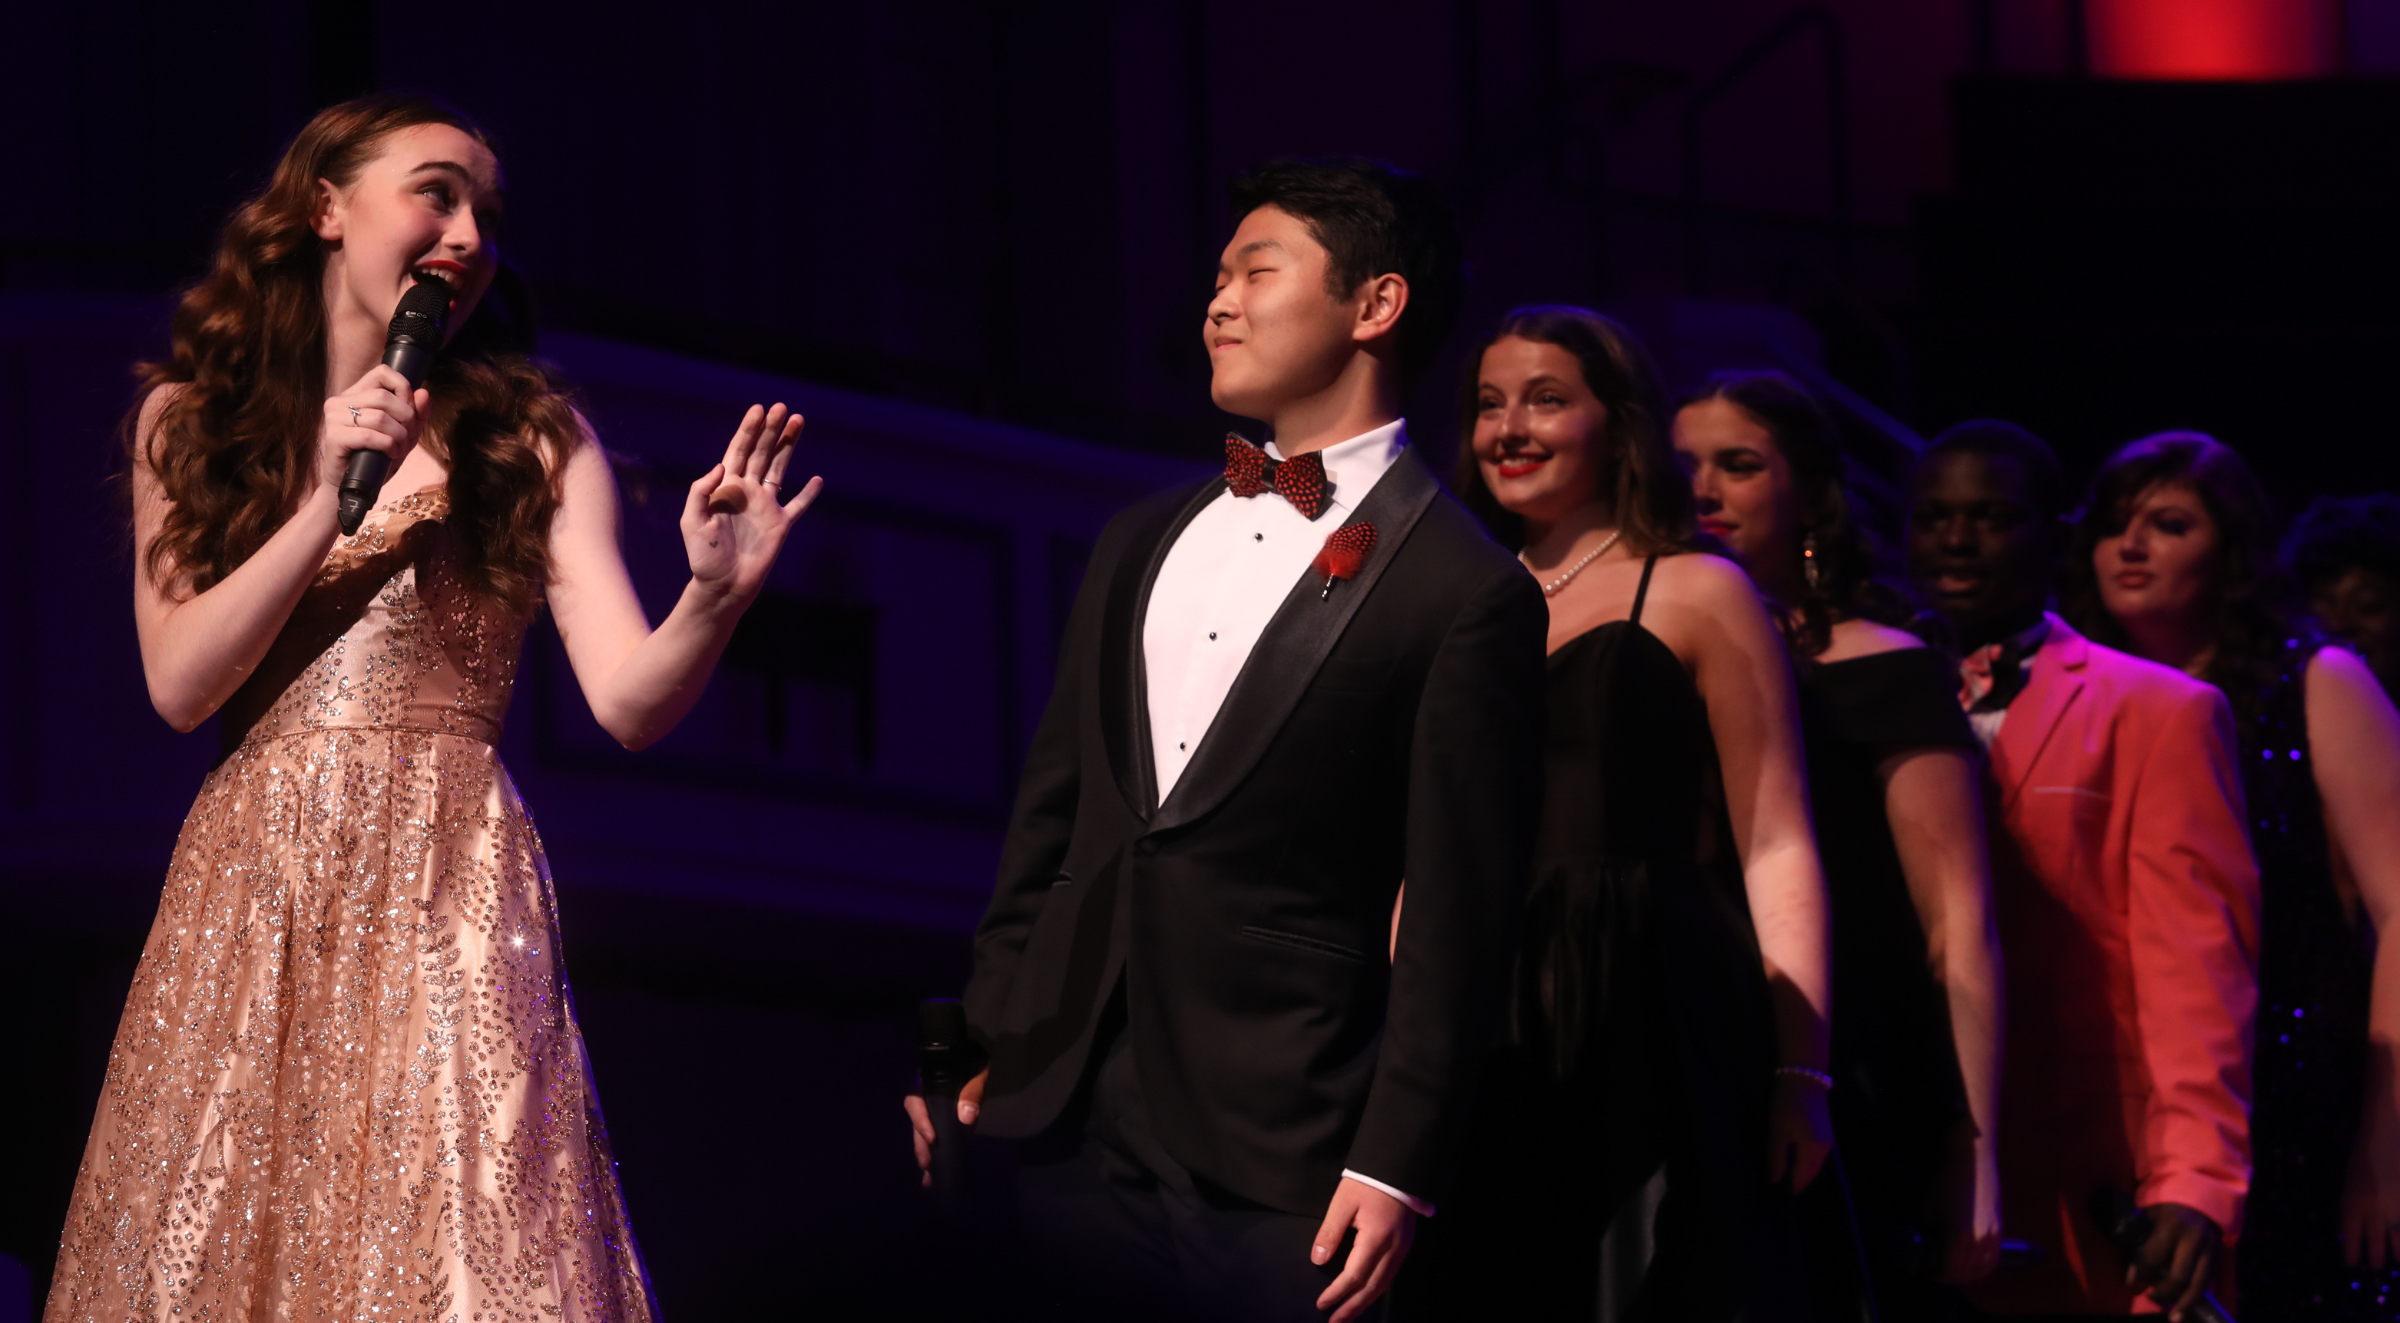 A young woman with wavy hair and a champagne dress holds a microphone, looks back and sings to a group of high school singers in formal wear.